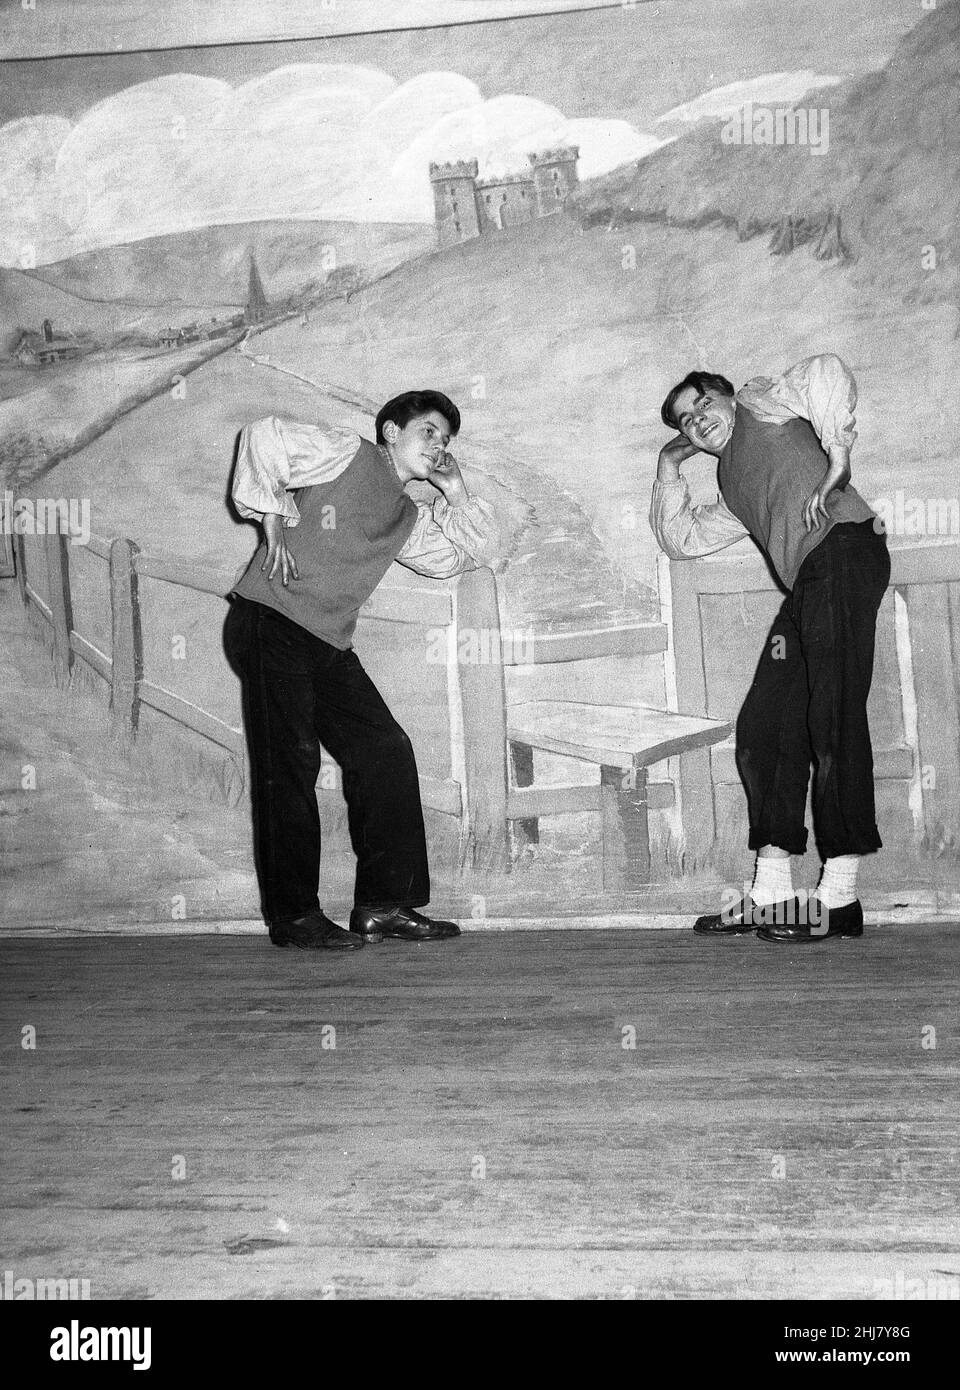 1956, historical, two teenage boys in their costumes on the stage, appearing in an amateur theatrical production of Jack and the Beanstalk, a famous old English folk tale or fable, England, UK. Stock Photo